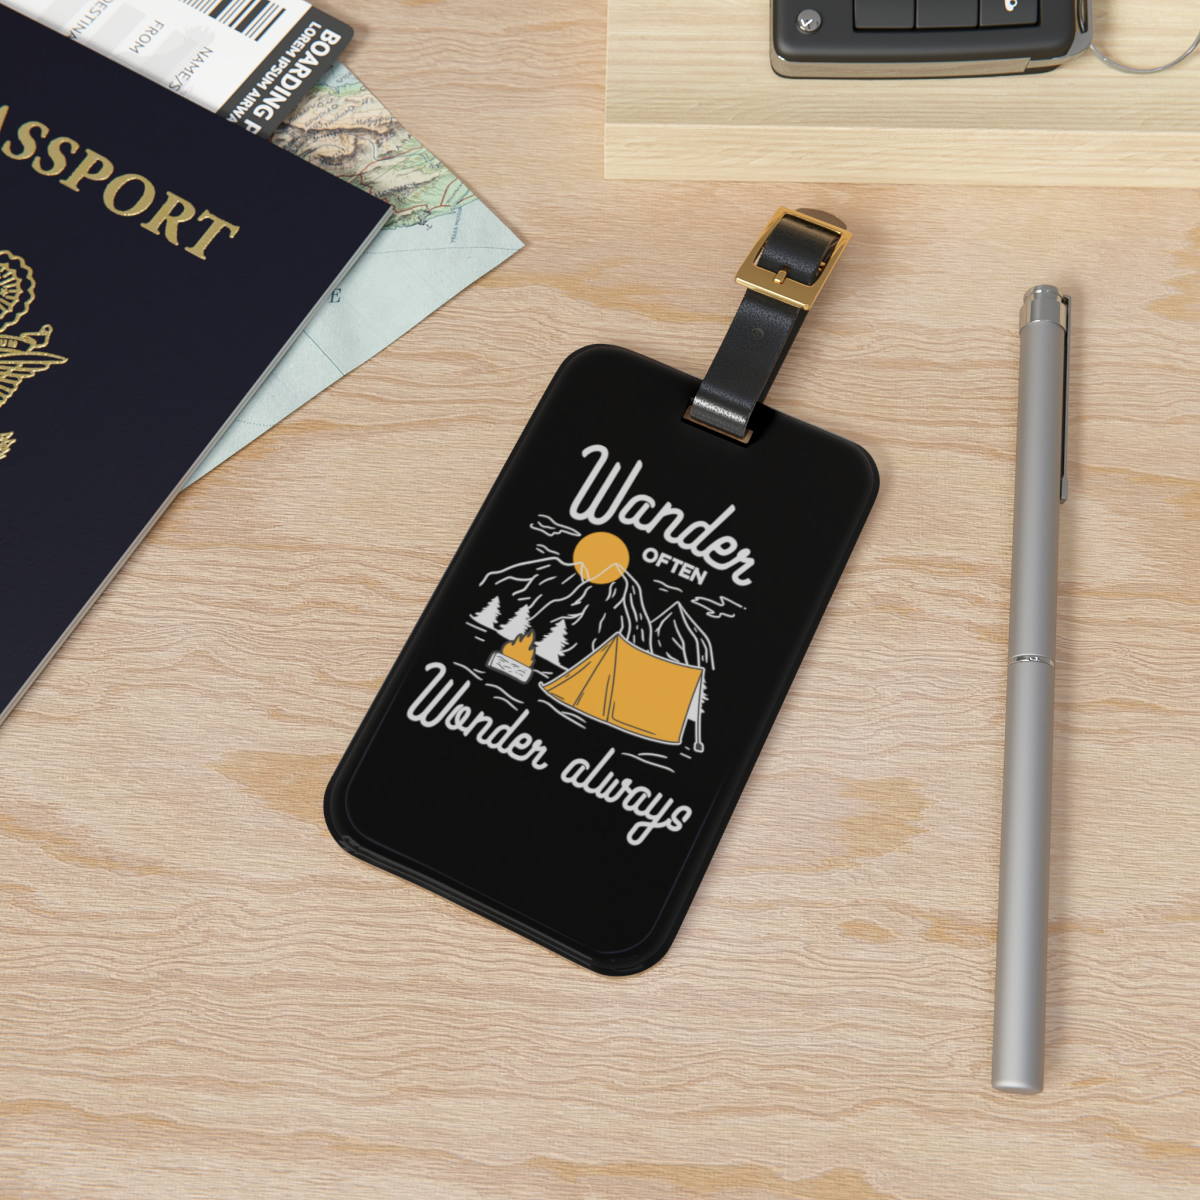 Acrylic Luggage Tag with Business Card Insert and Leather Strap - Lightweight Tr - $21.63